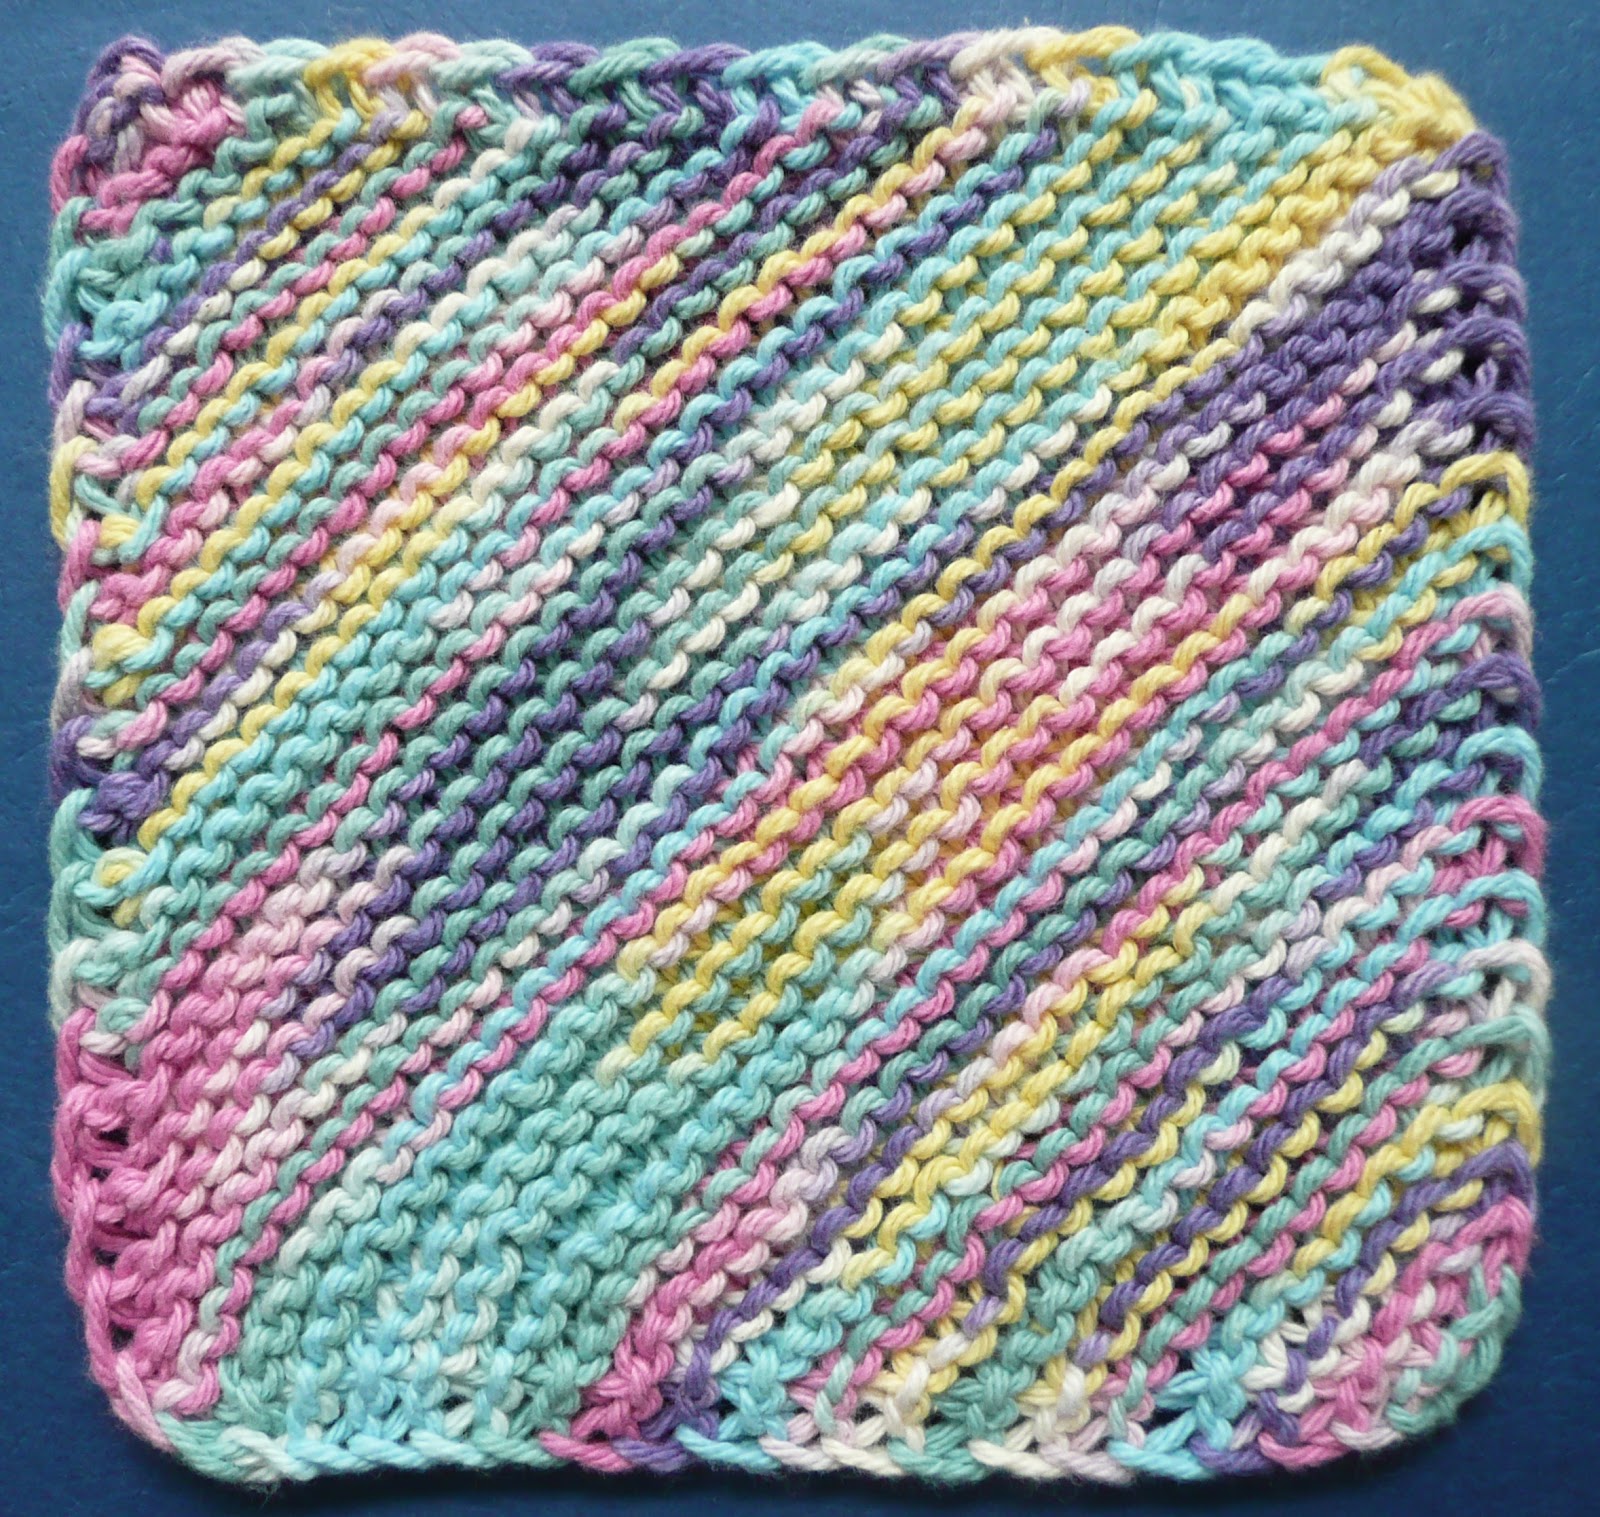 Perfect One-Ounce Dishcloth - FREE Patterns: February 2013